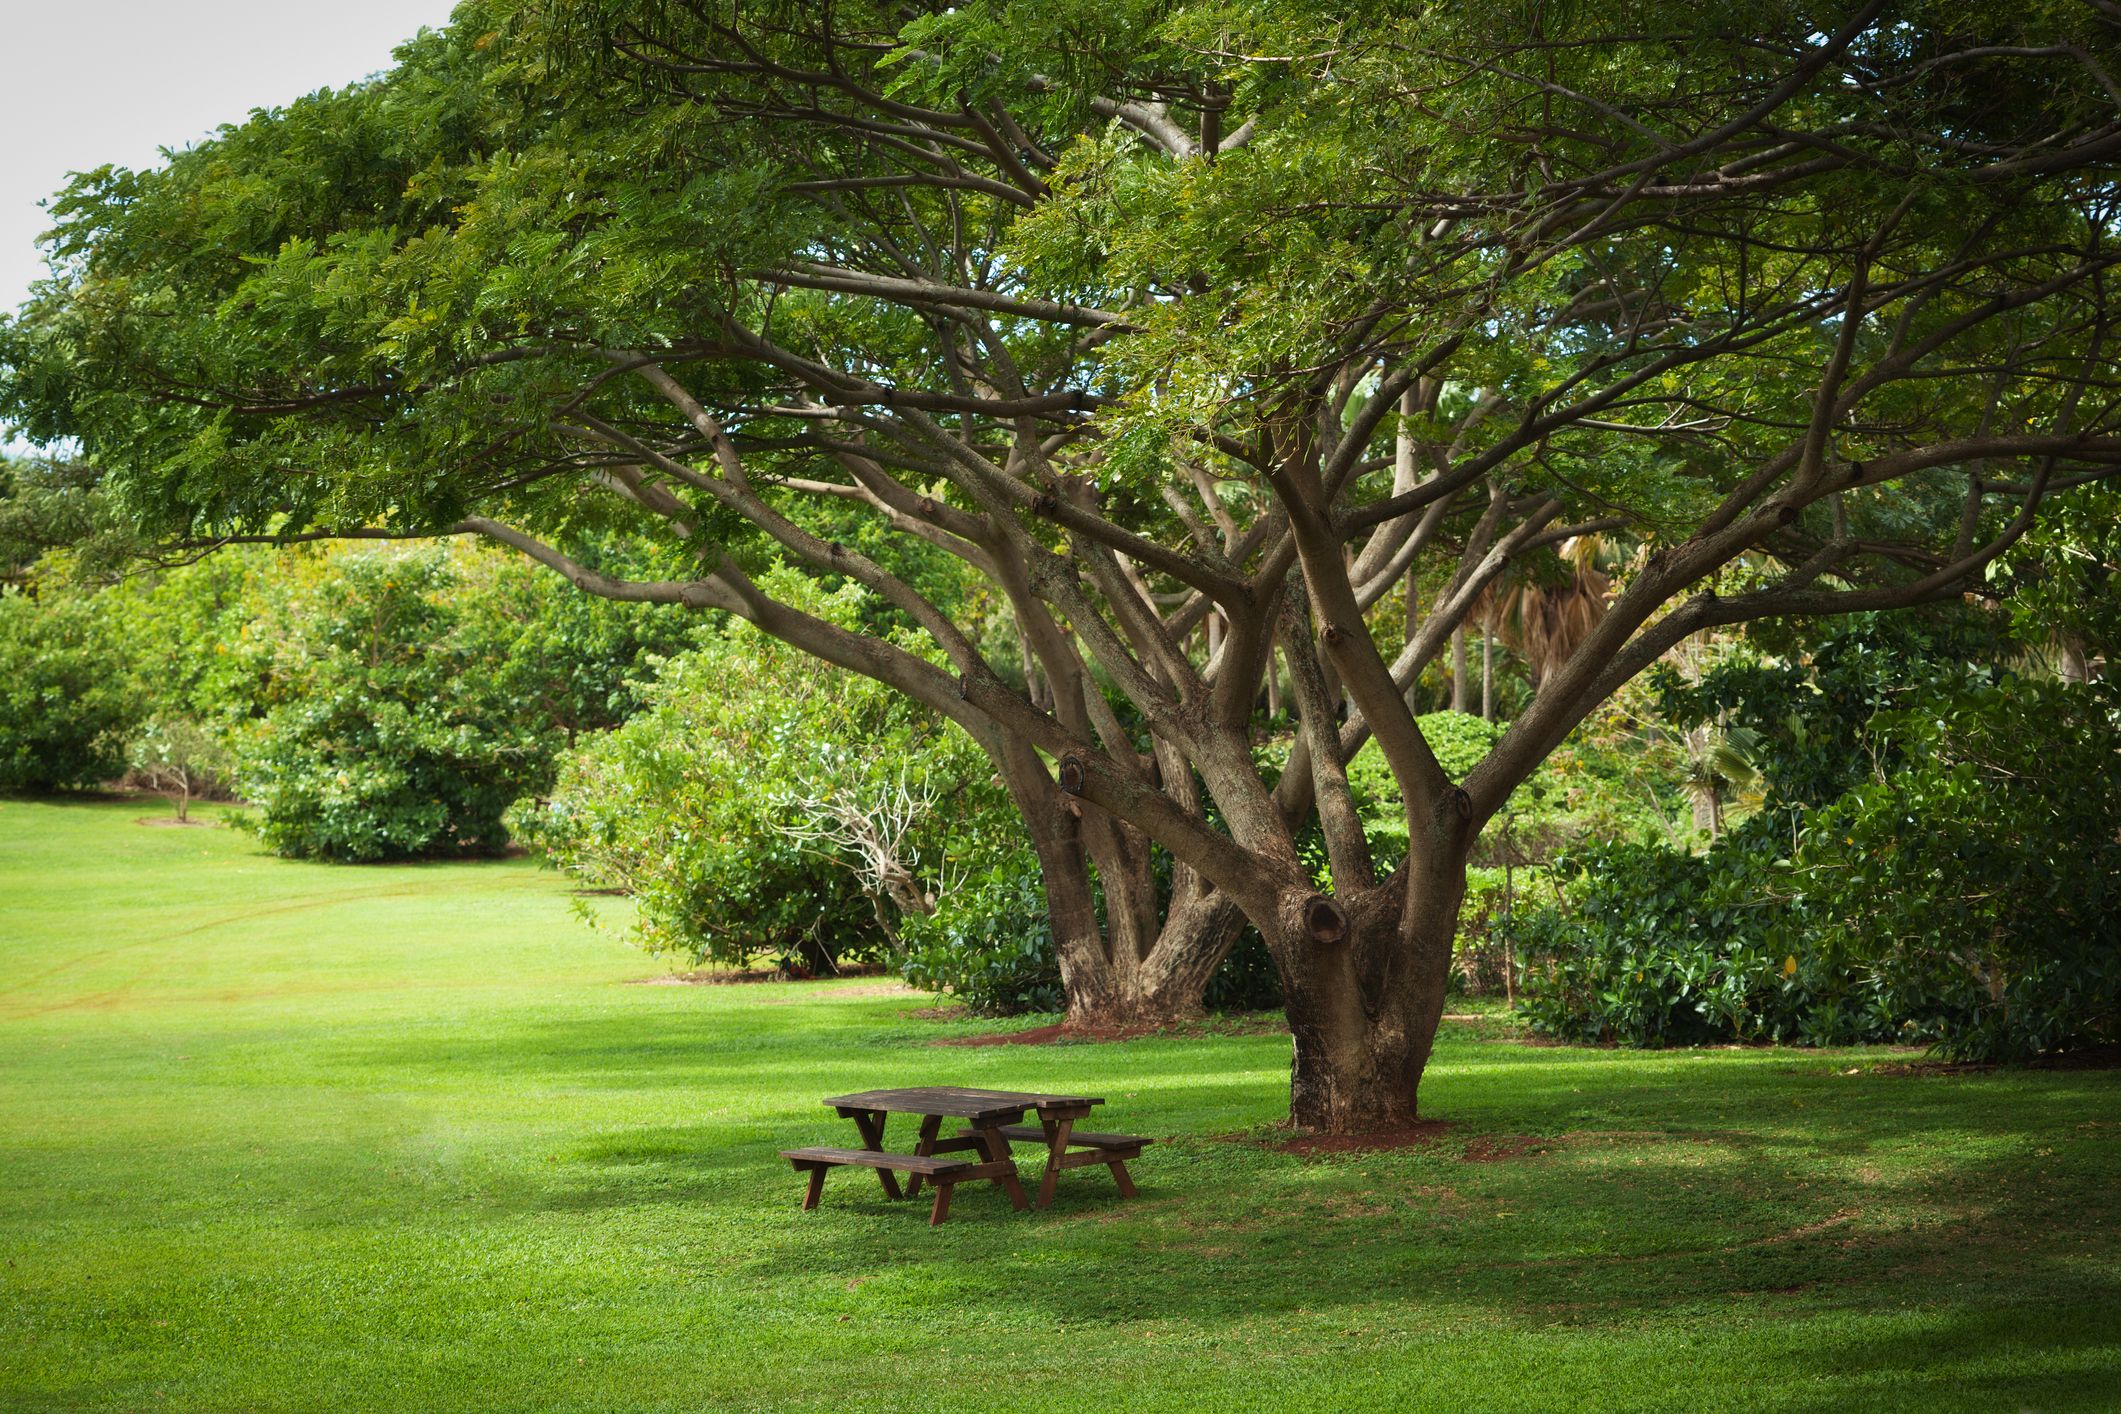 13 Fast-growing Shade Trees for Dappled Sunlight Where You Want It